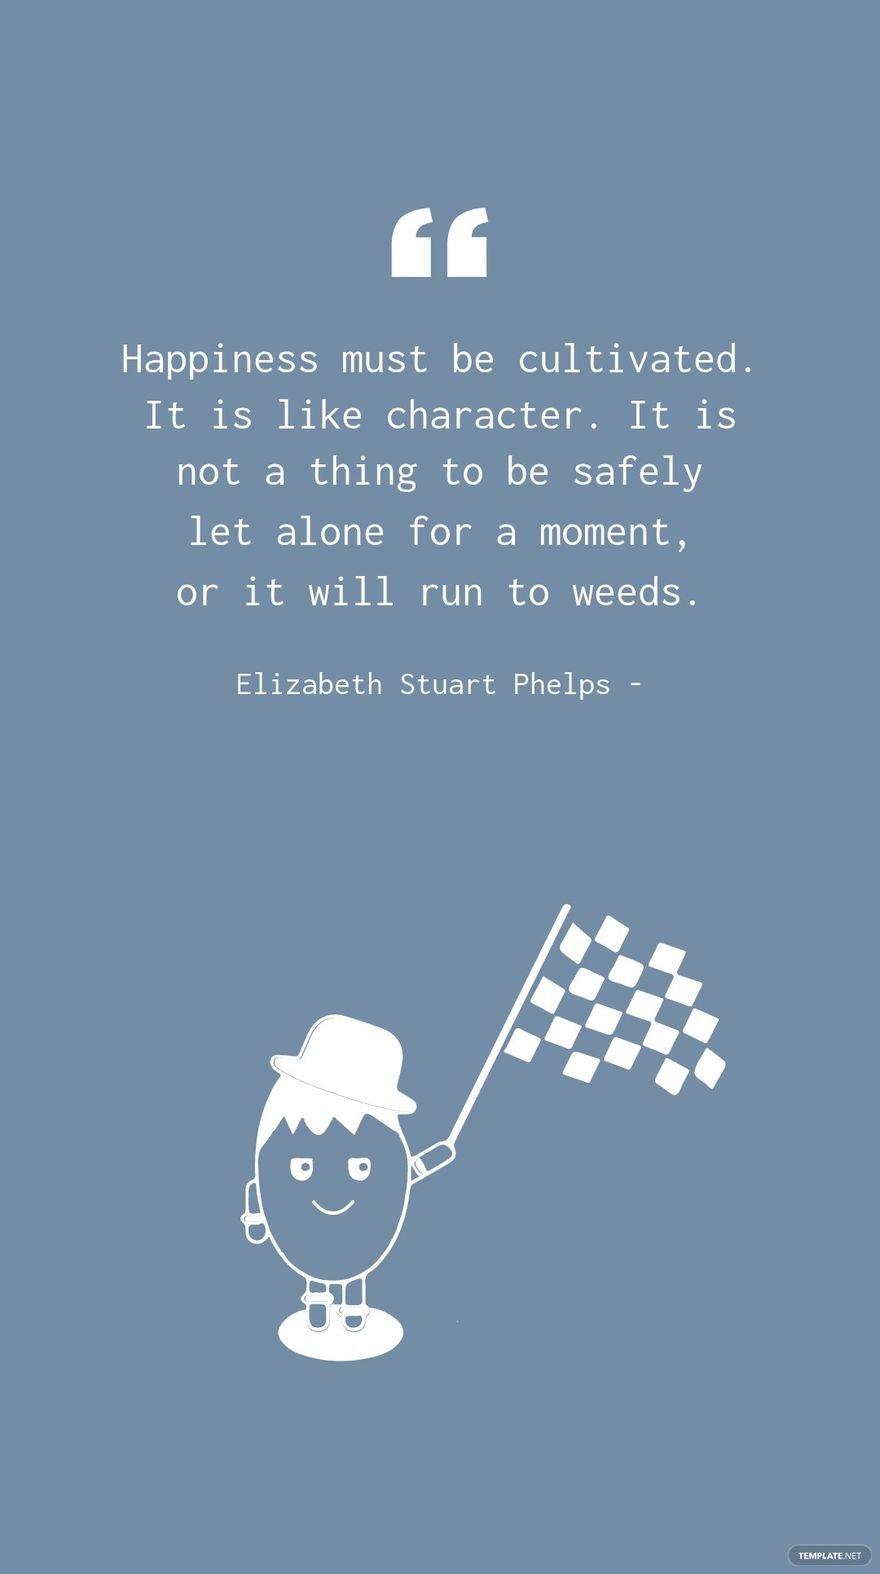 Free Elizabeth Stuart Phelps - Happiness must be cultivated. It is like character. It is not a thing to be safely let alone for a moment, or it will run to weeds. in JPG